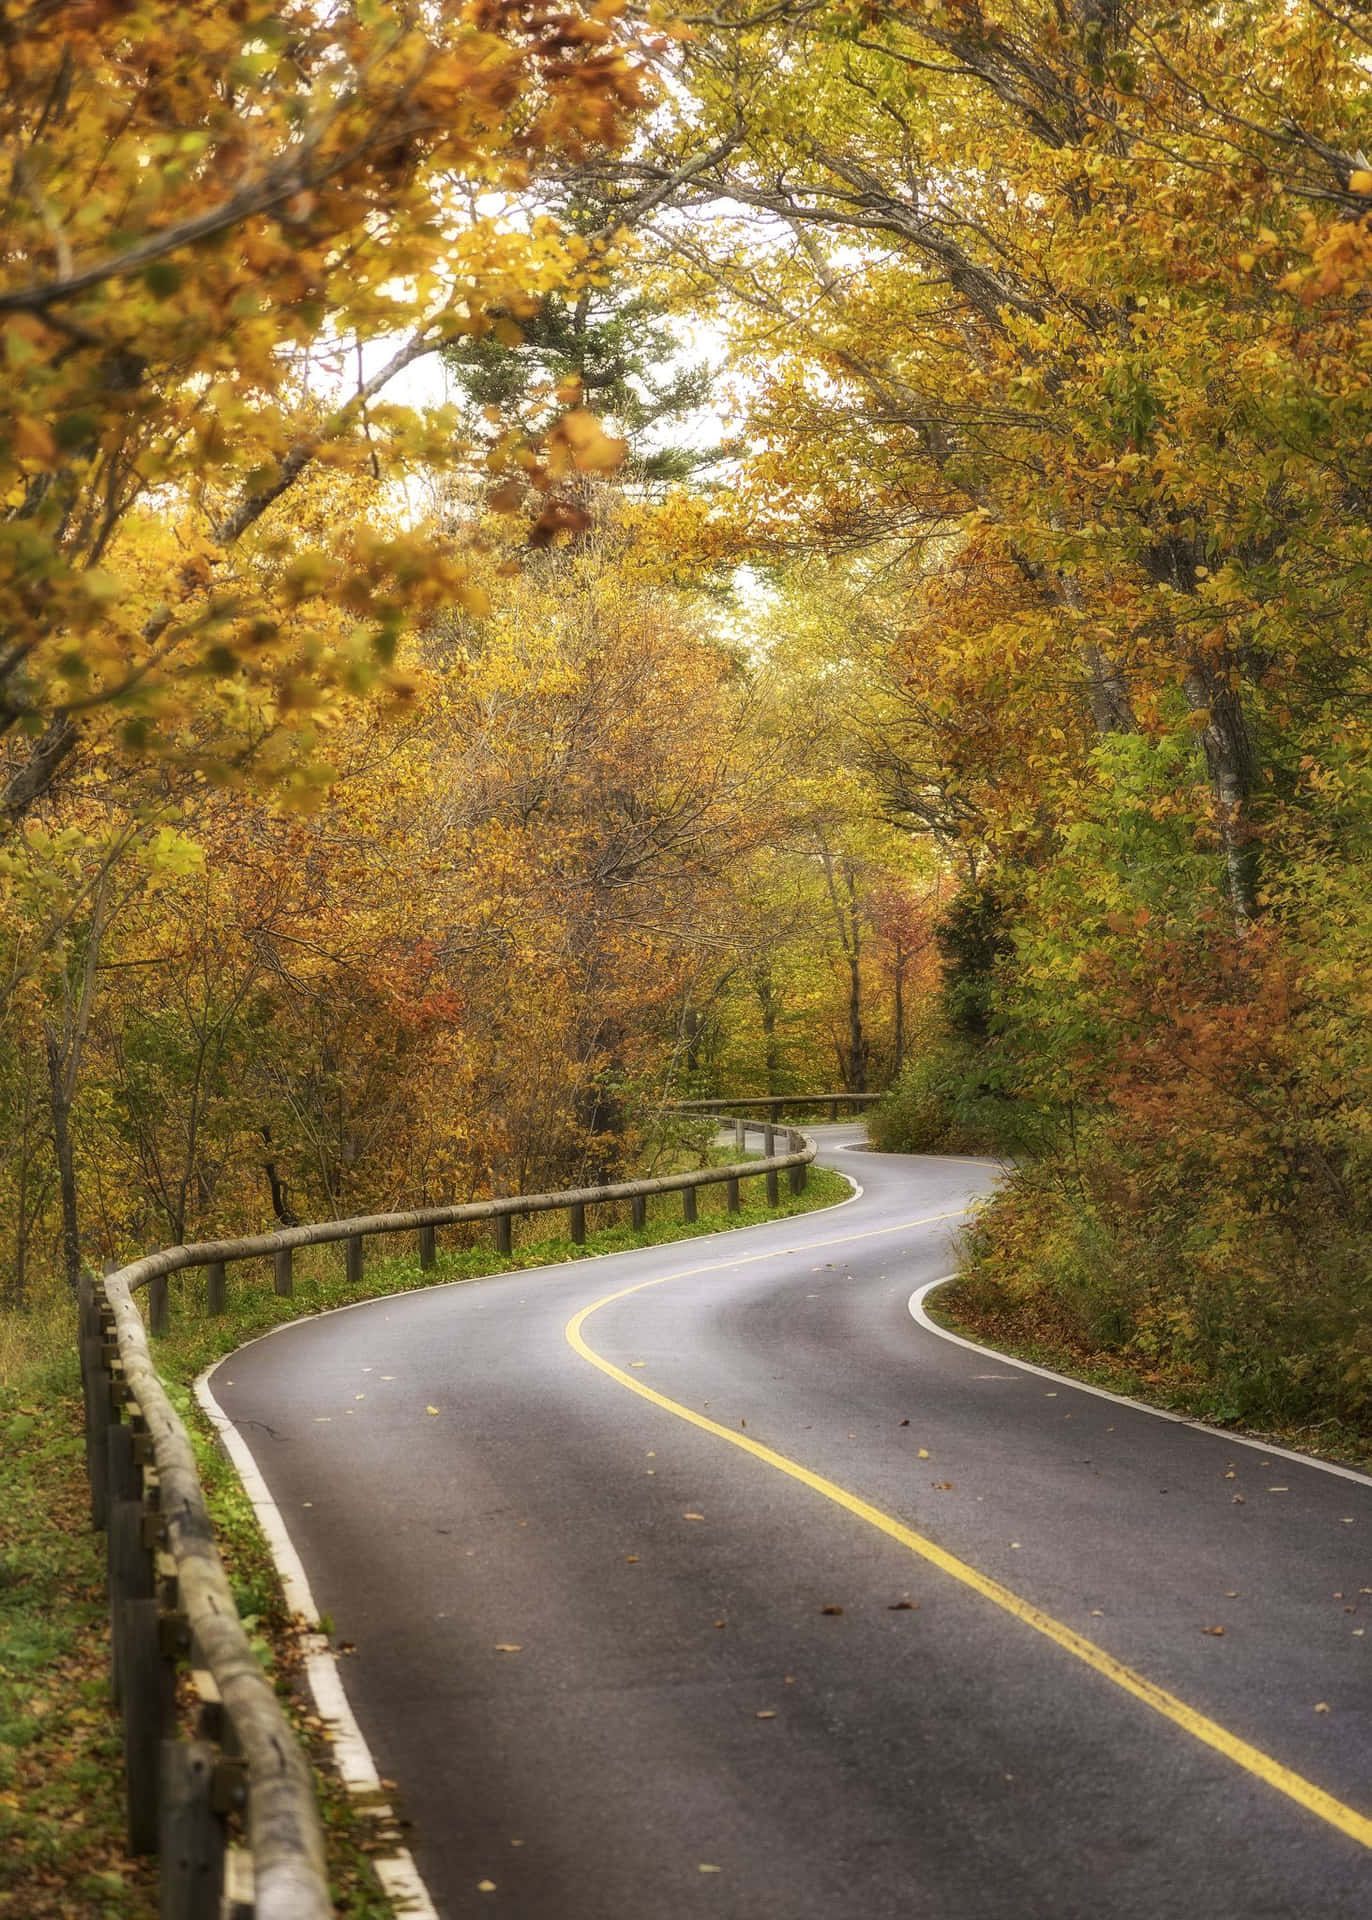 A Curvy Road In The Fall With Trees In The Background